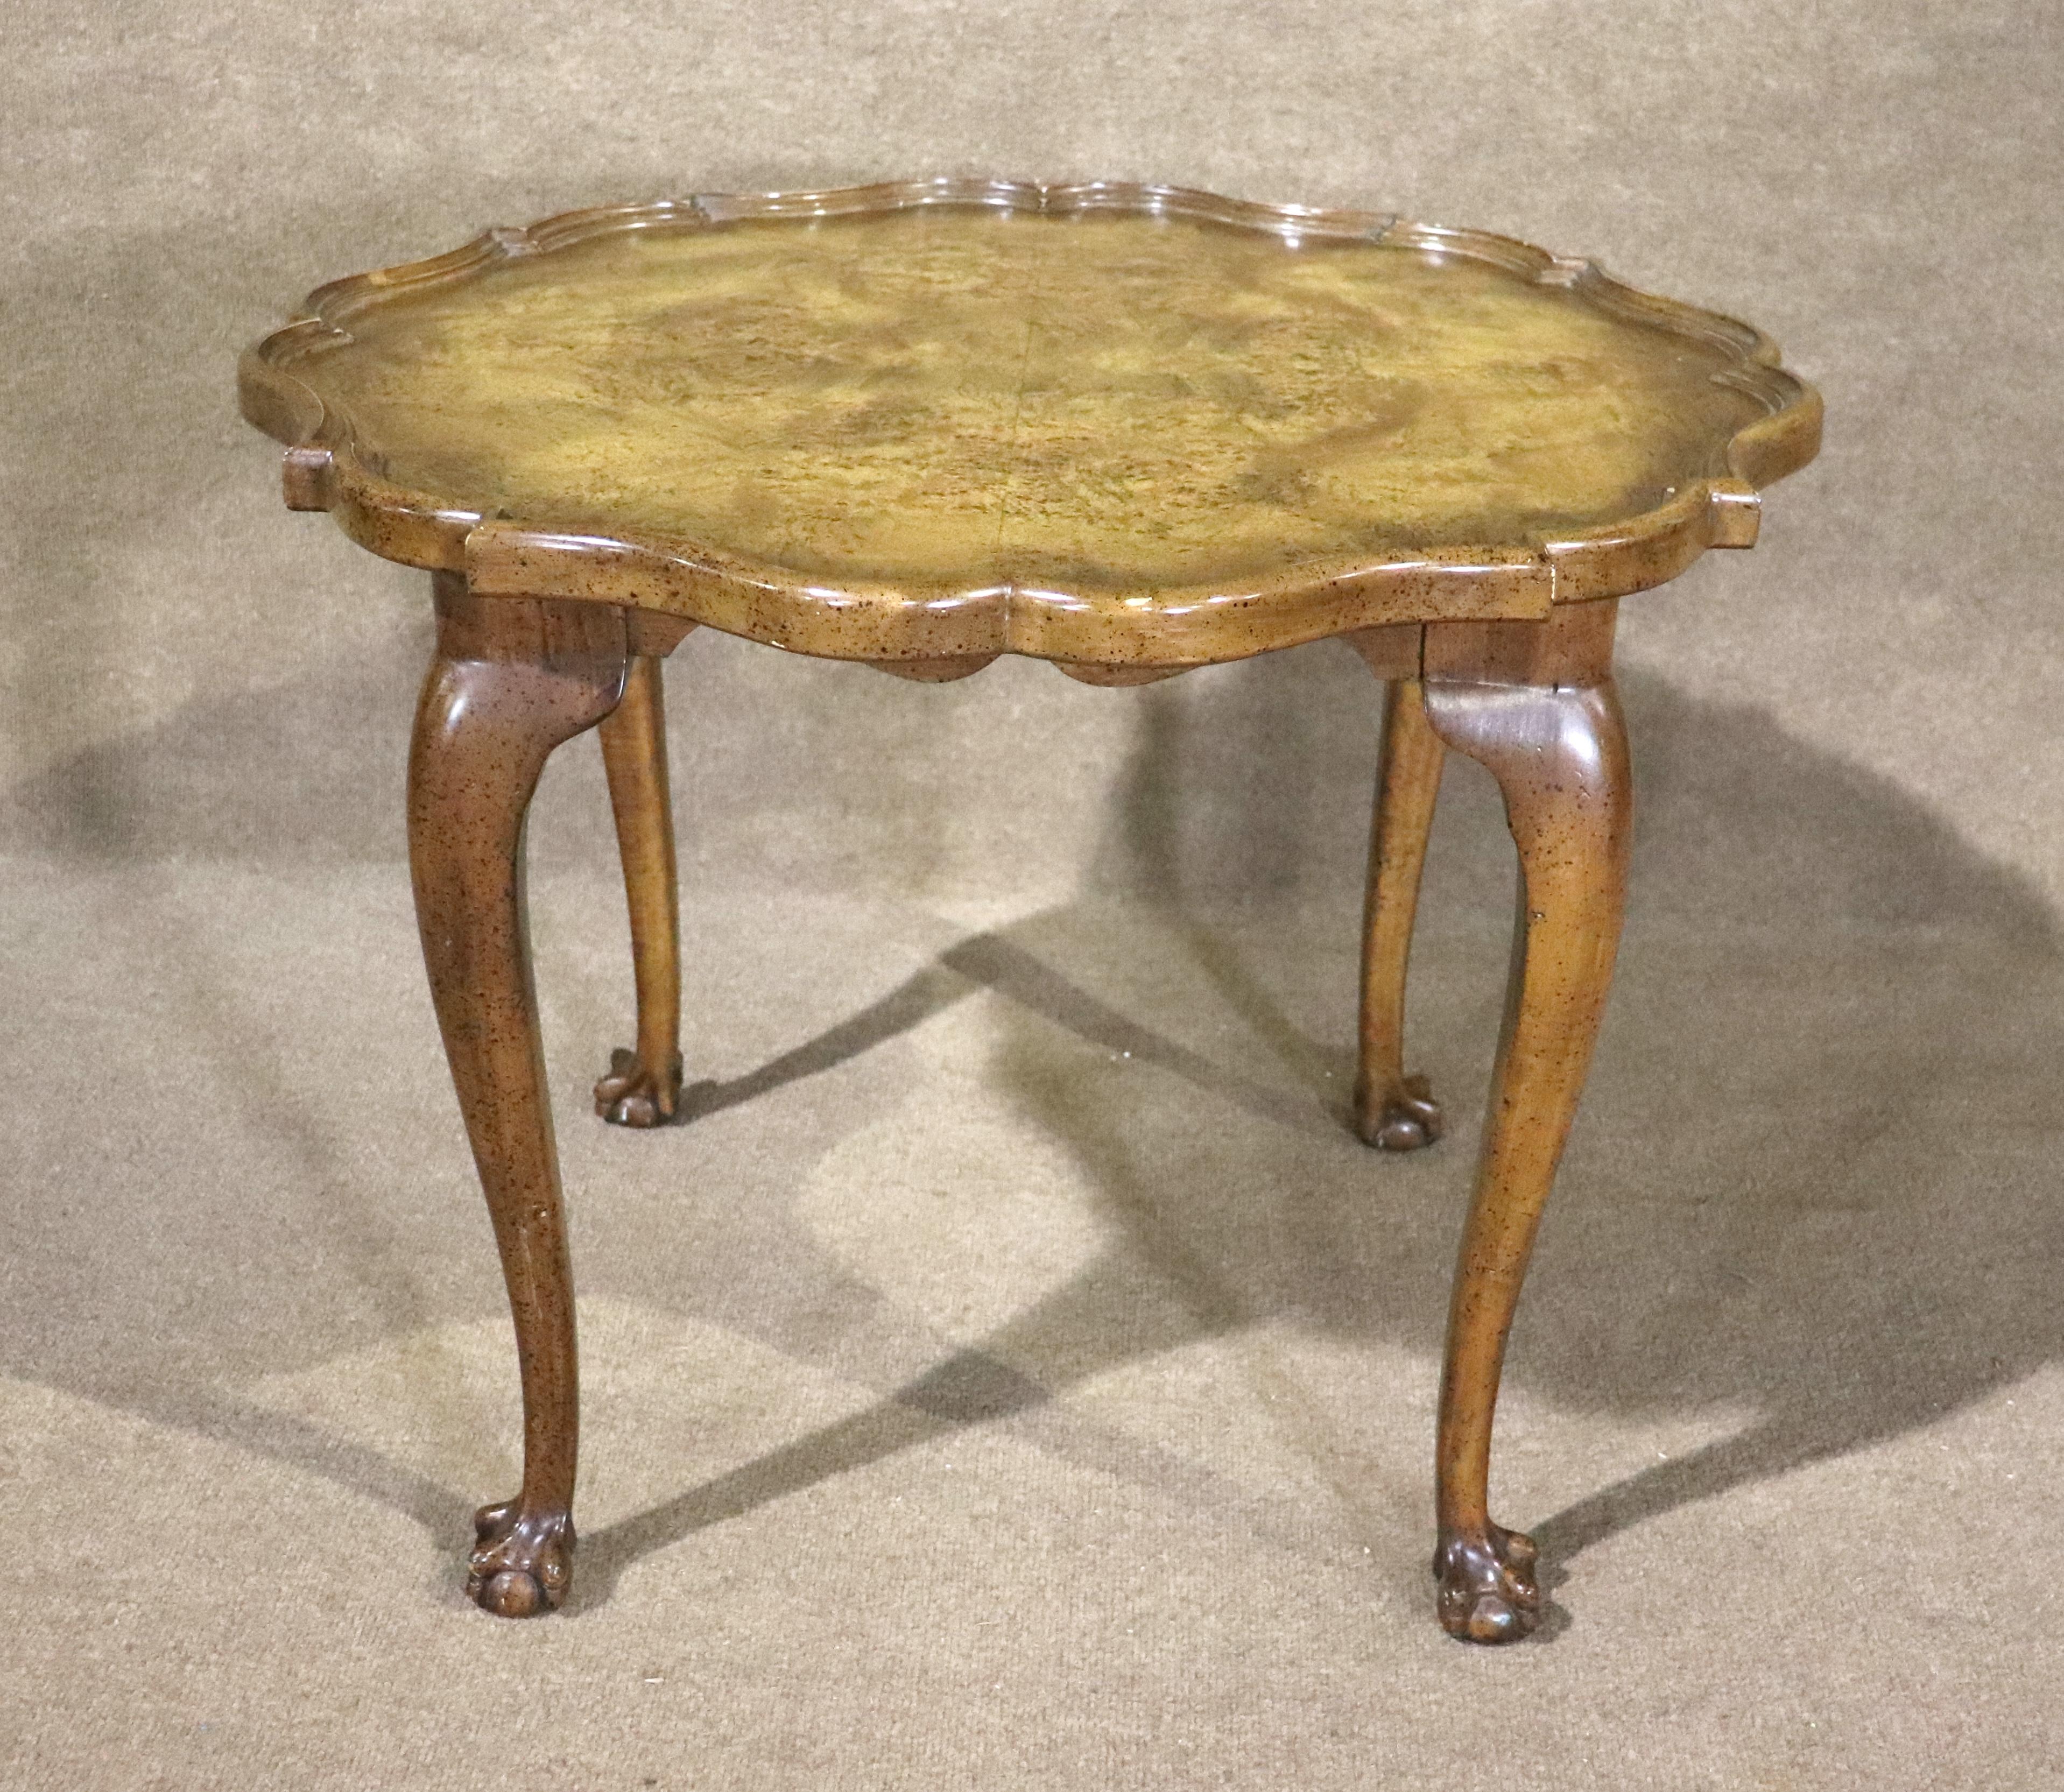 Antique side table with brilliant burled walnut top and claw foot legs.
Please confirm location NY or NJ